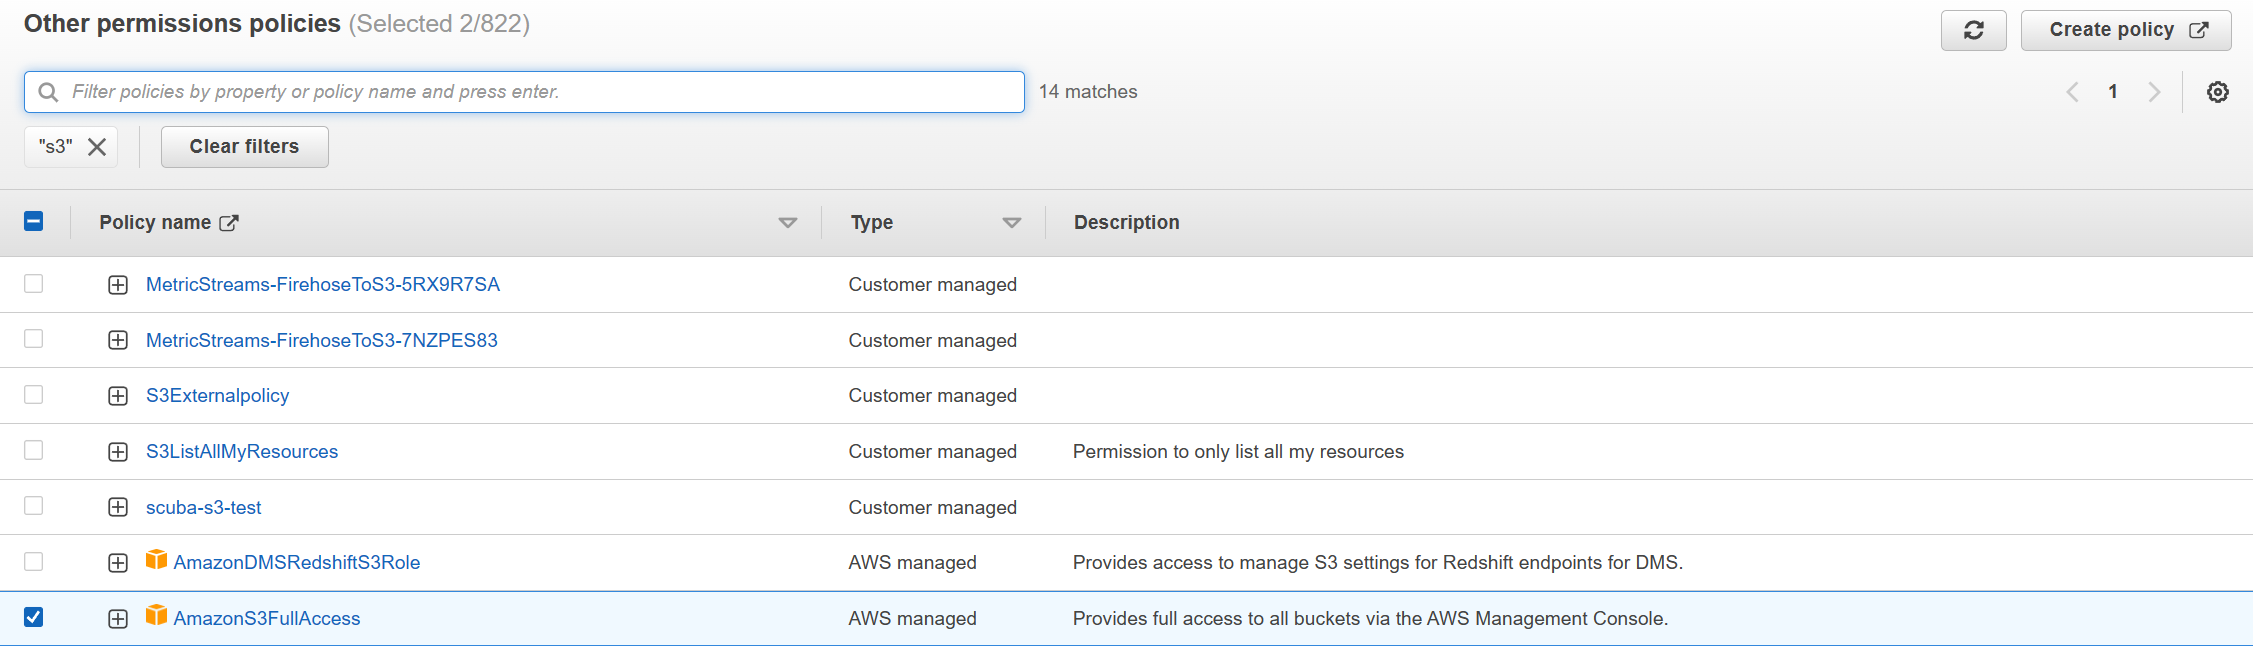 Screenshot of the AWS Management Console Add permissions policies screen.